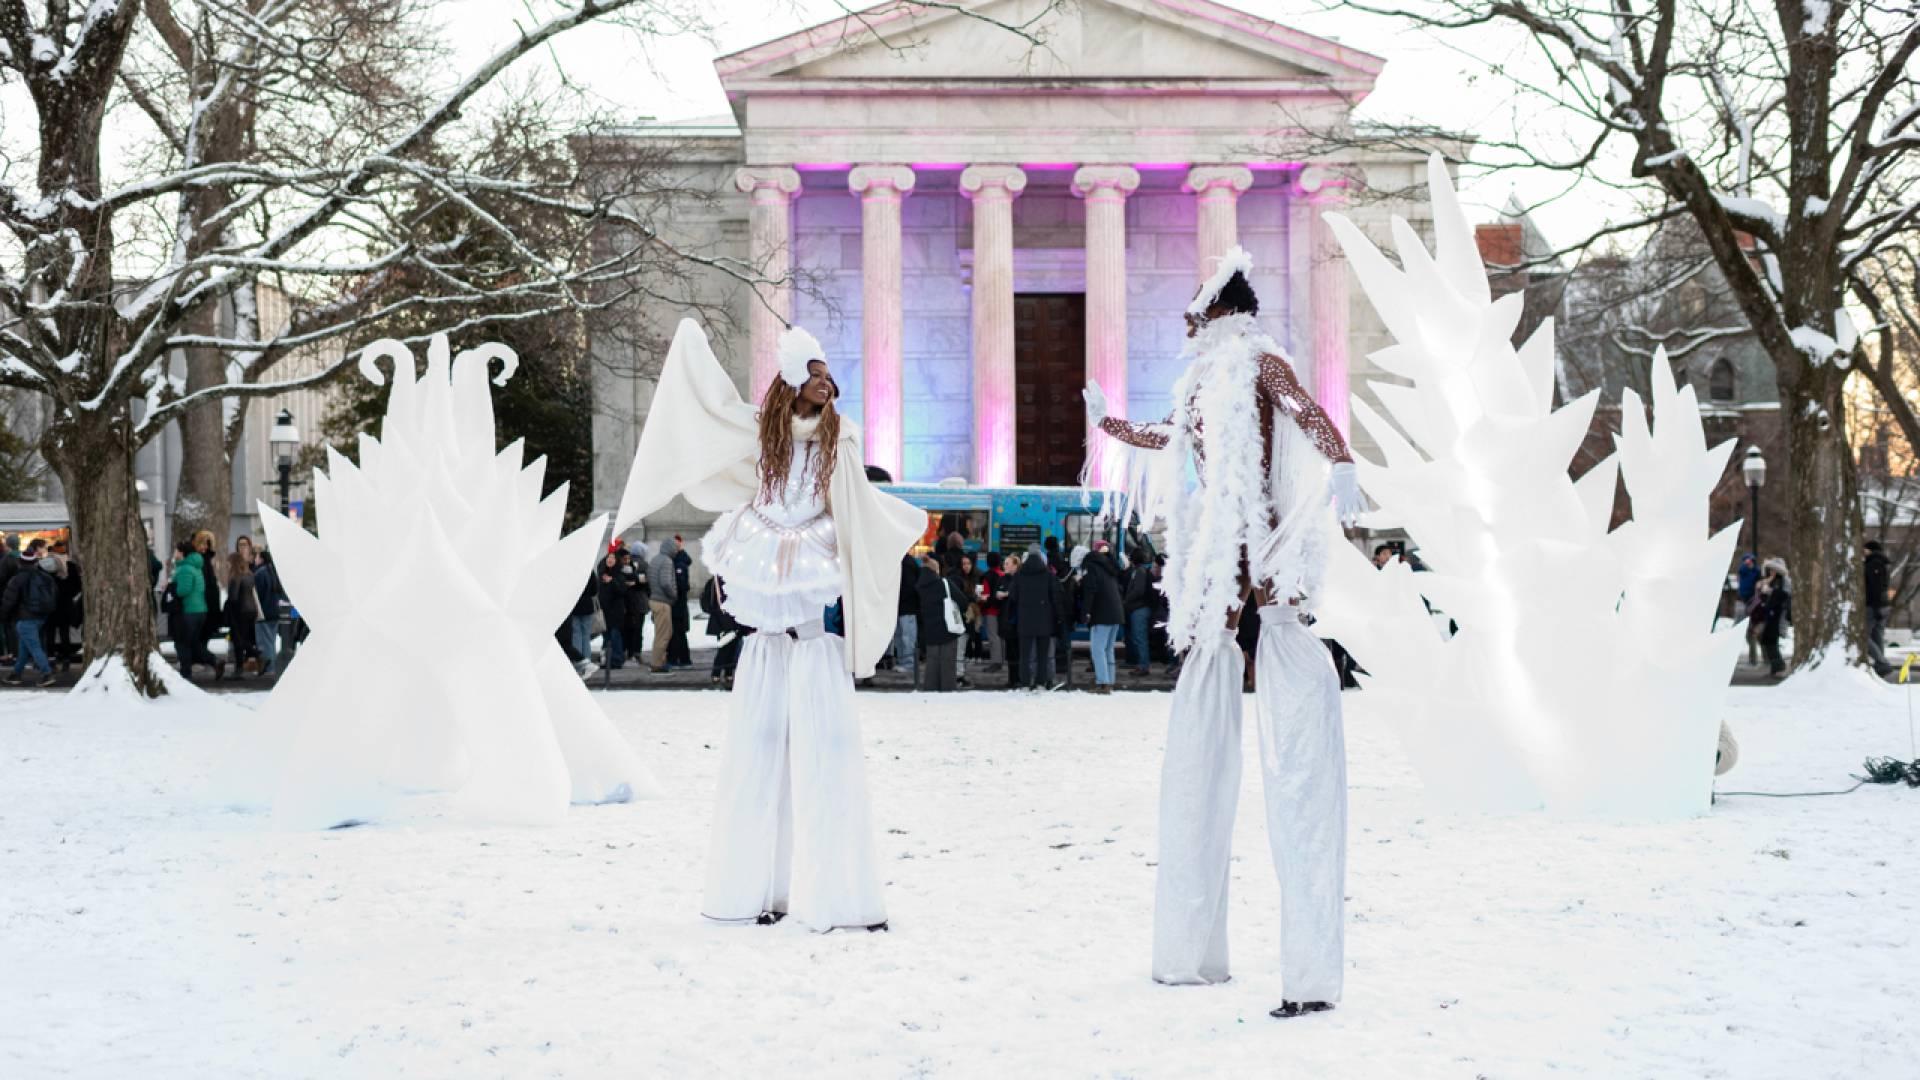 The Wintersession Kick-off Festival on Cannon Green featured local performers, bonfires, food trucks and ice sculptures. 